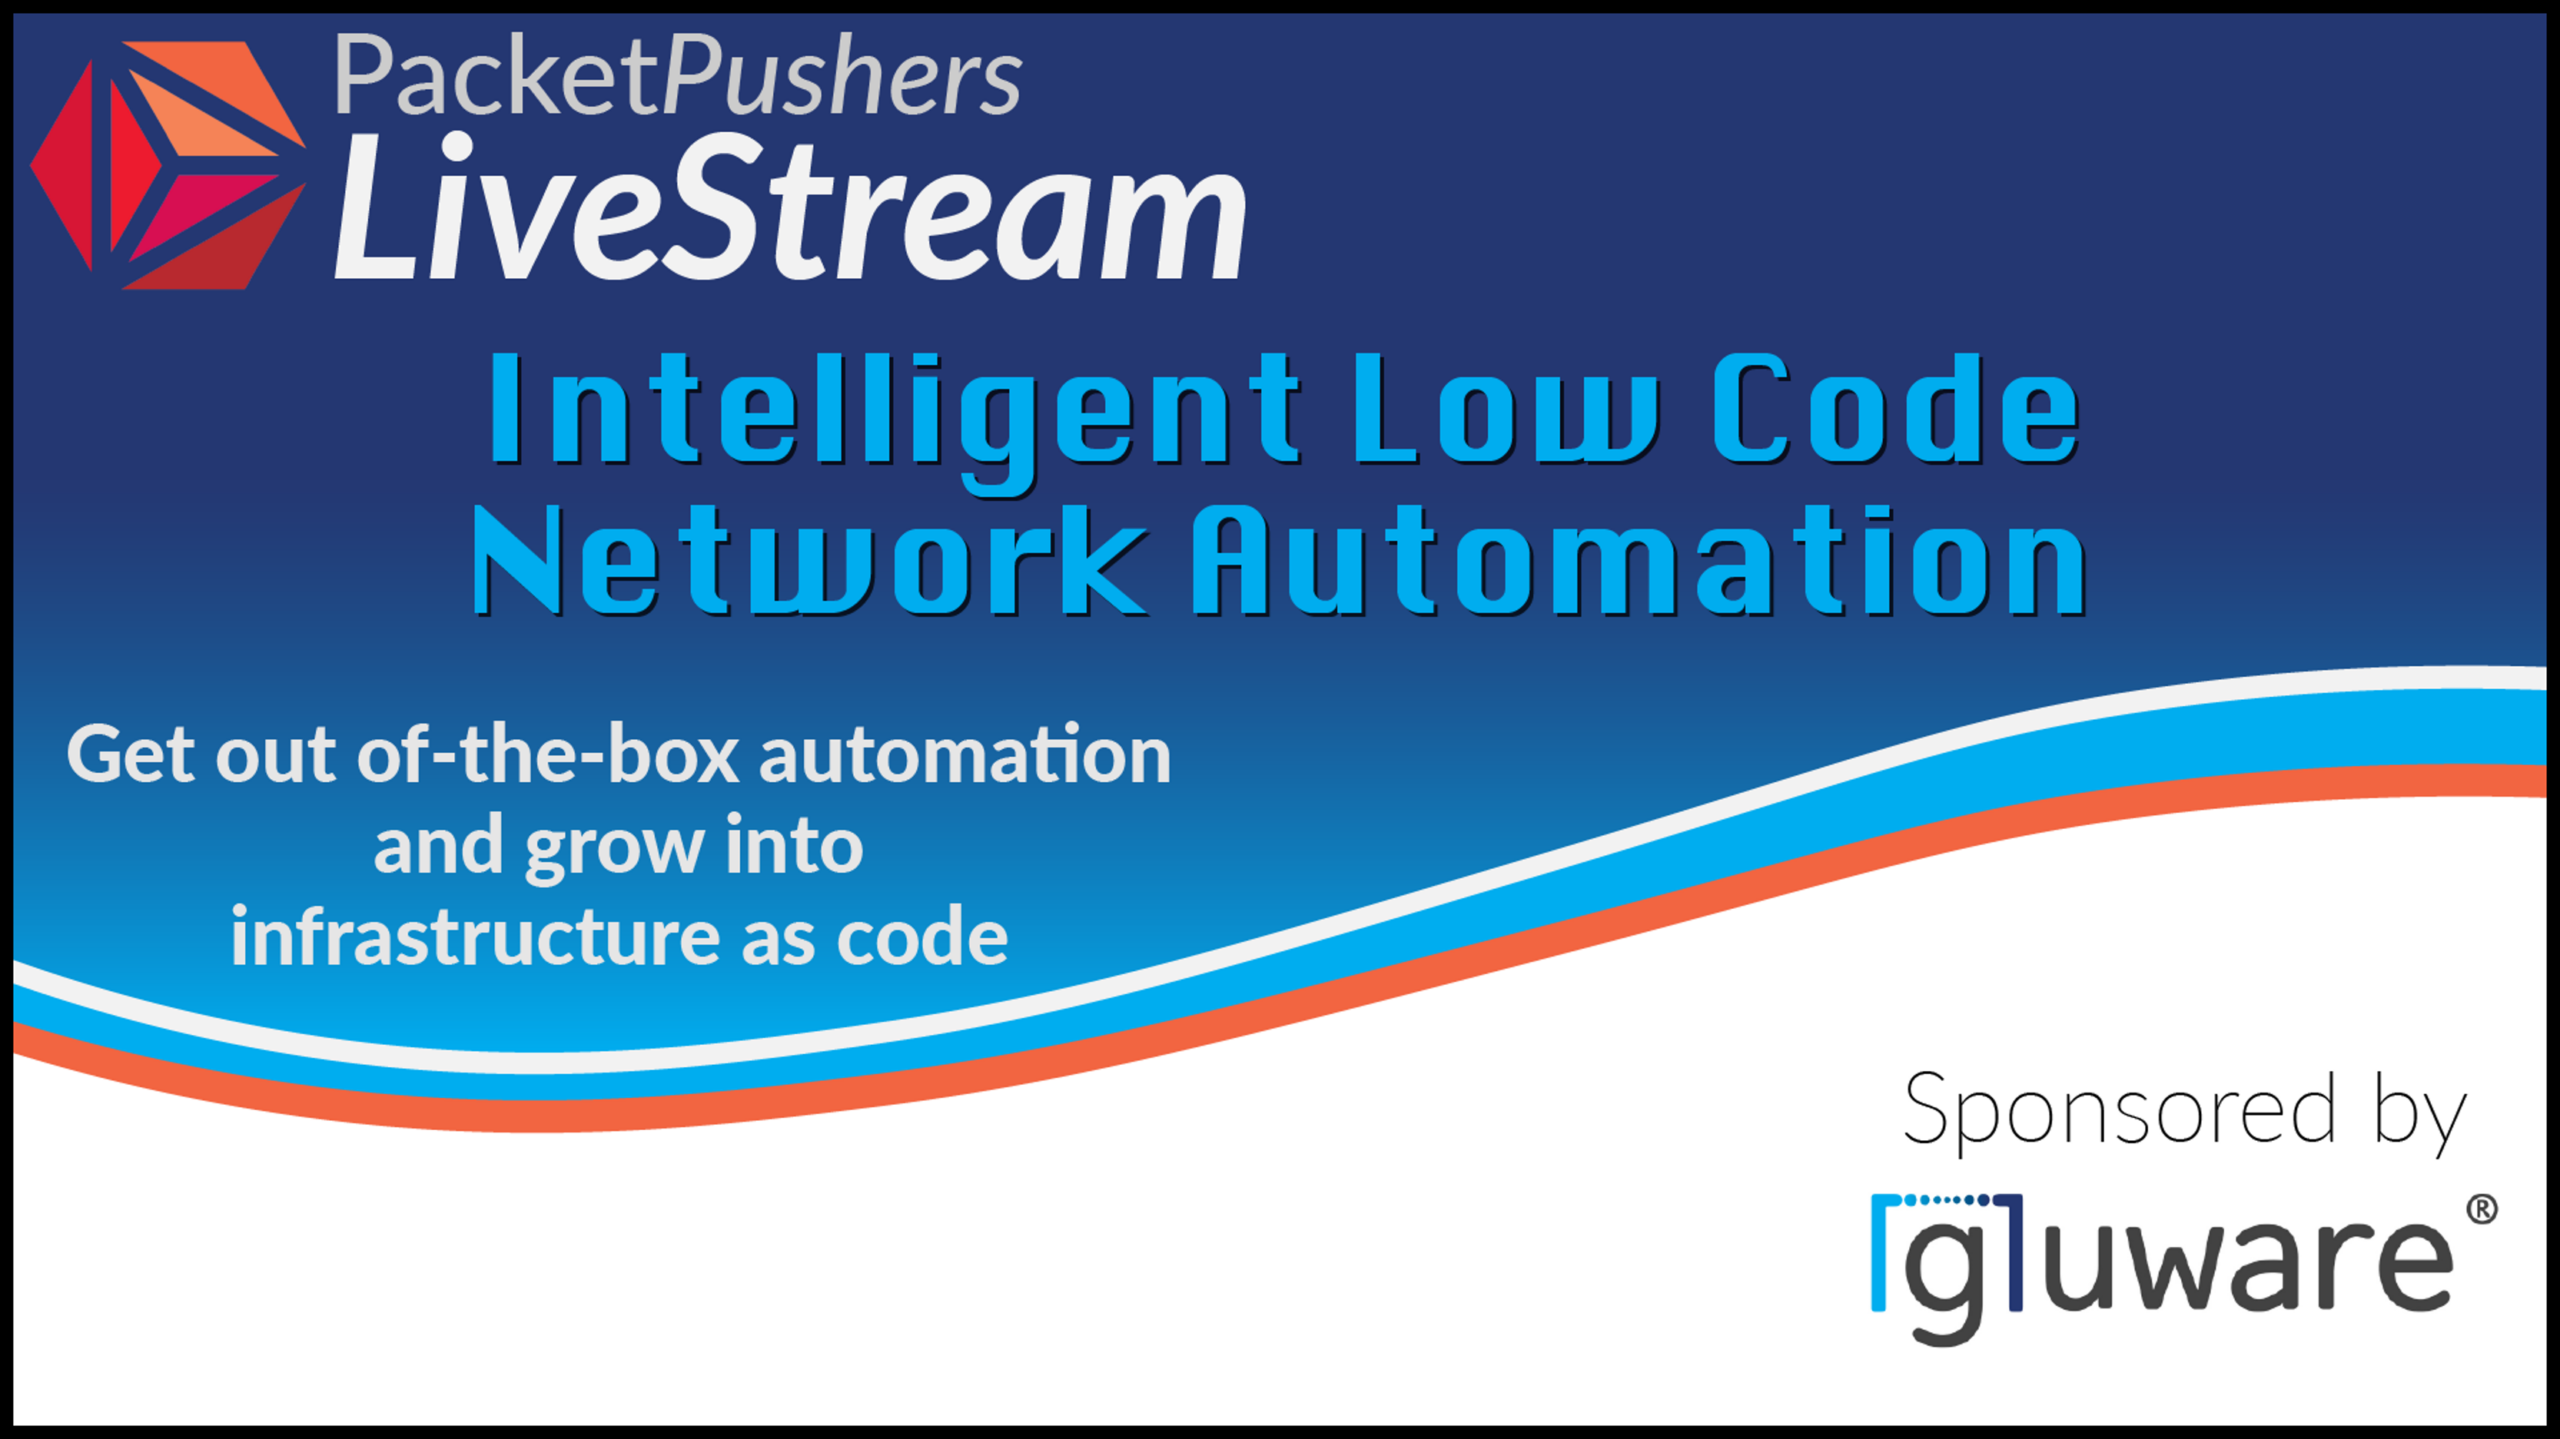 Gluware to Showcase Intelligent Low Code Network Automation on Upcoming Packet Pushers LiveStream - Ad no date